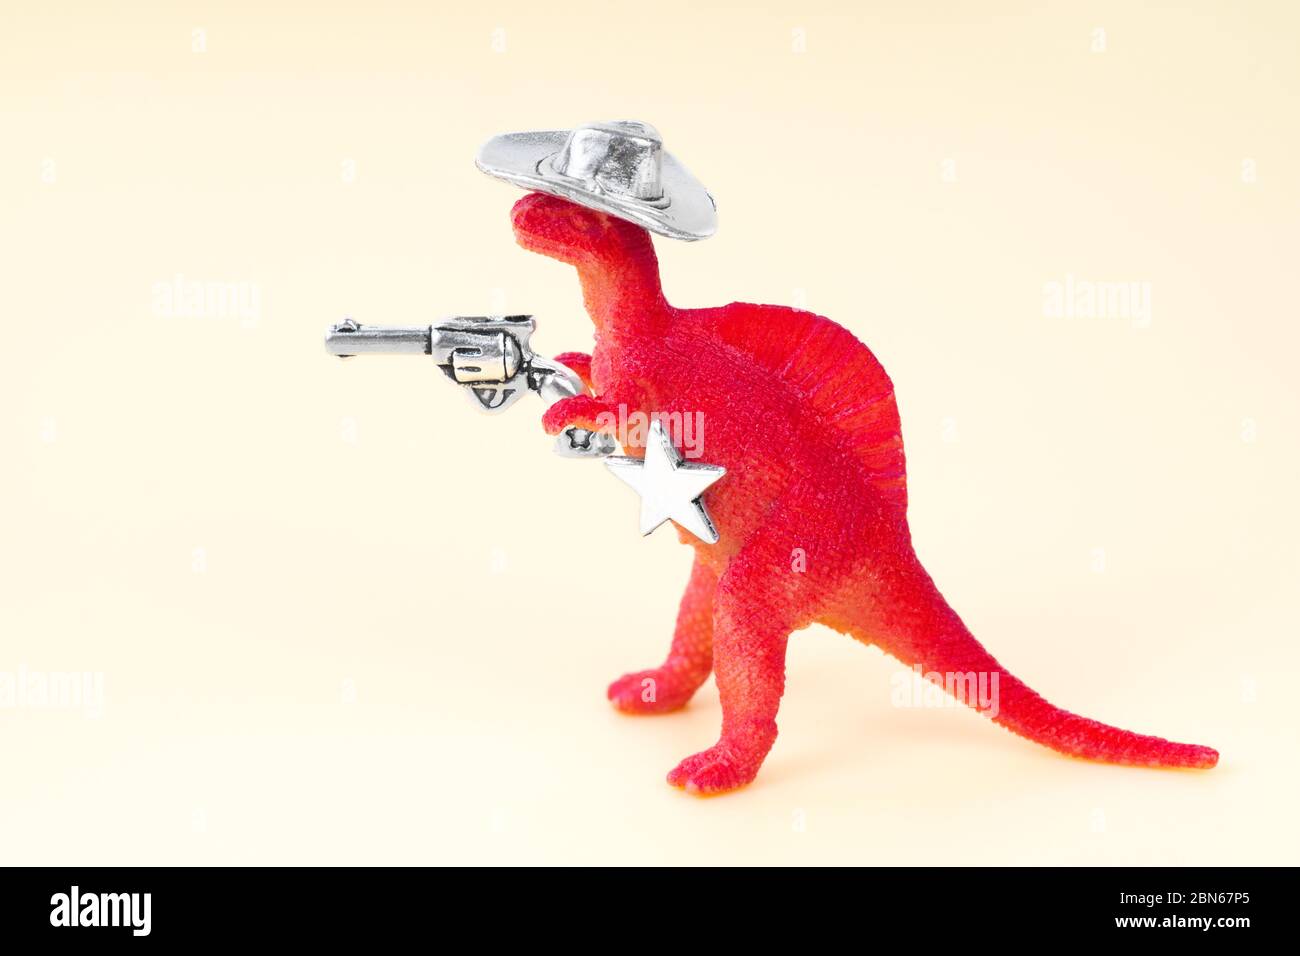 Close up of a small red toy dinosaur wearing a cowboy hat, holding a revolver in his arm and having a sheriff star on a neutral background. Stock Photo